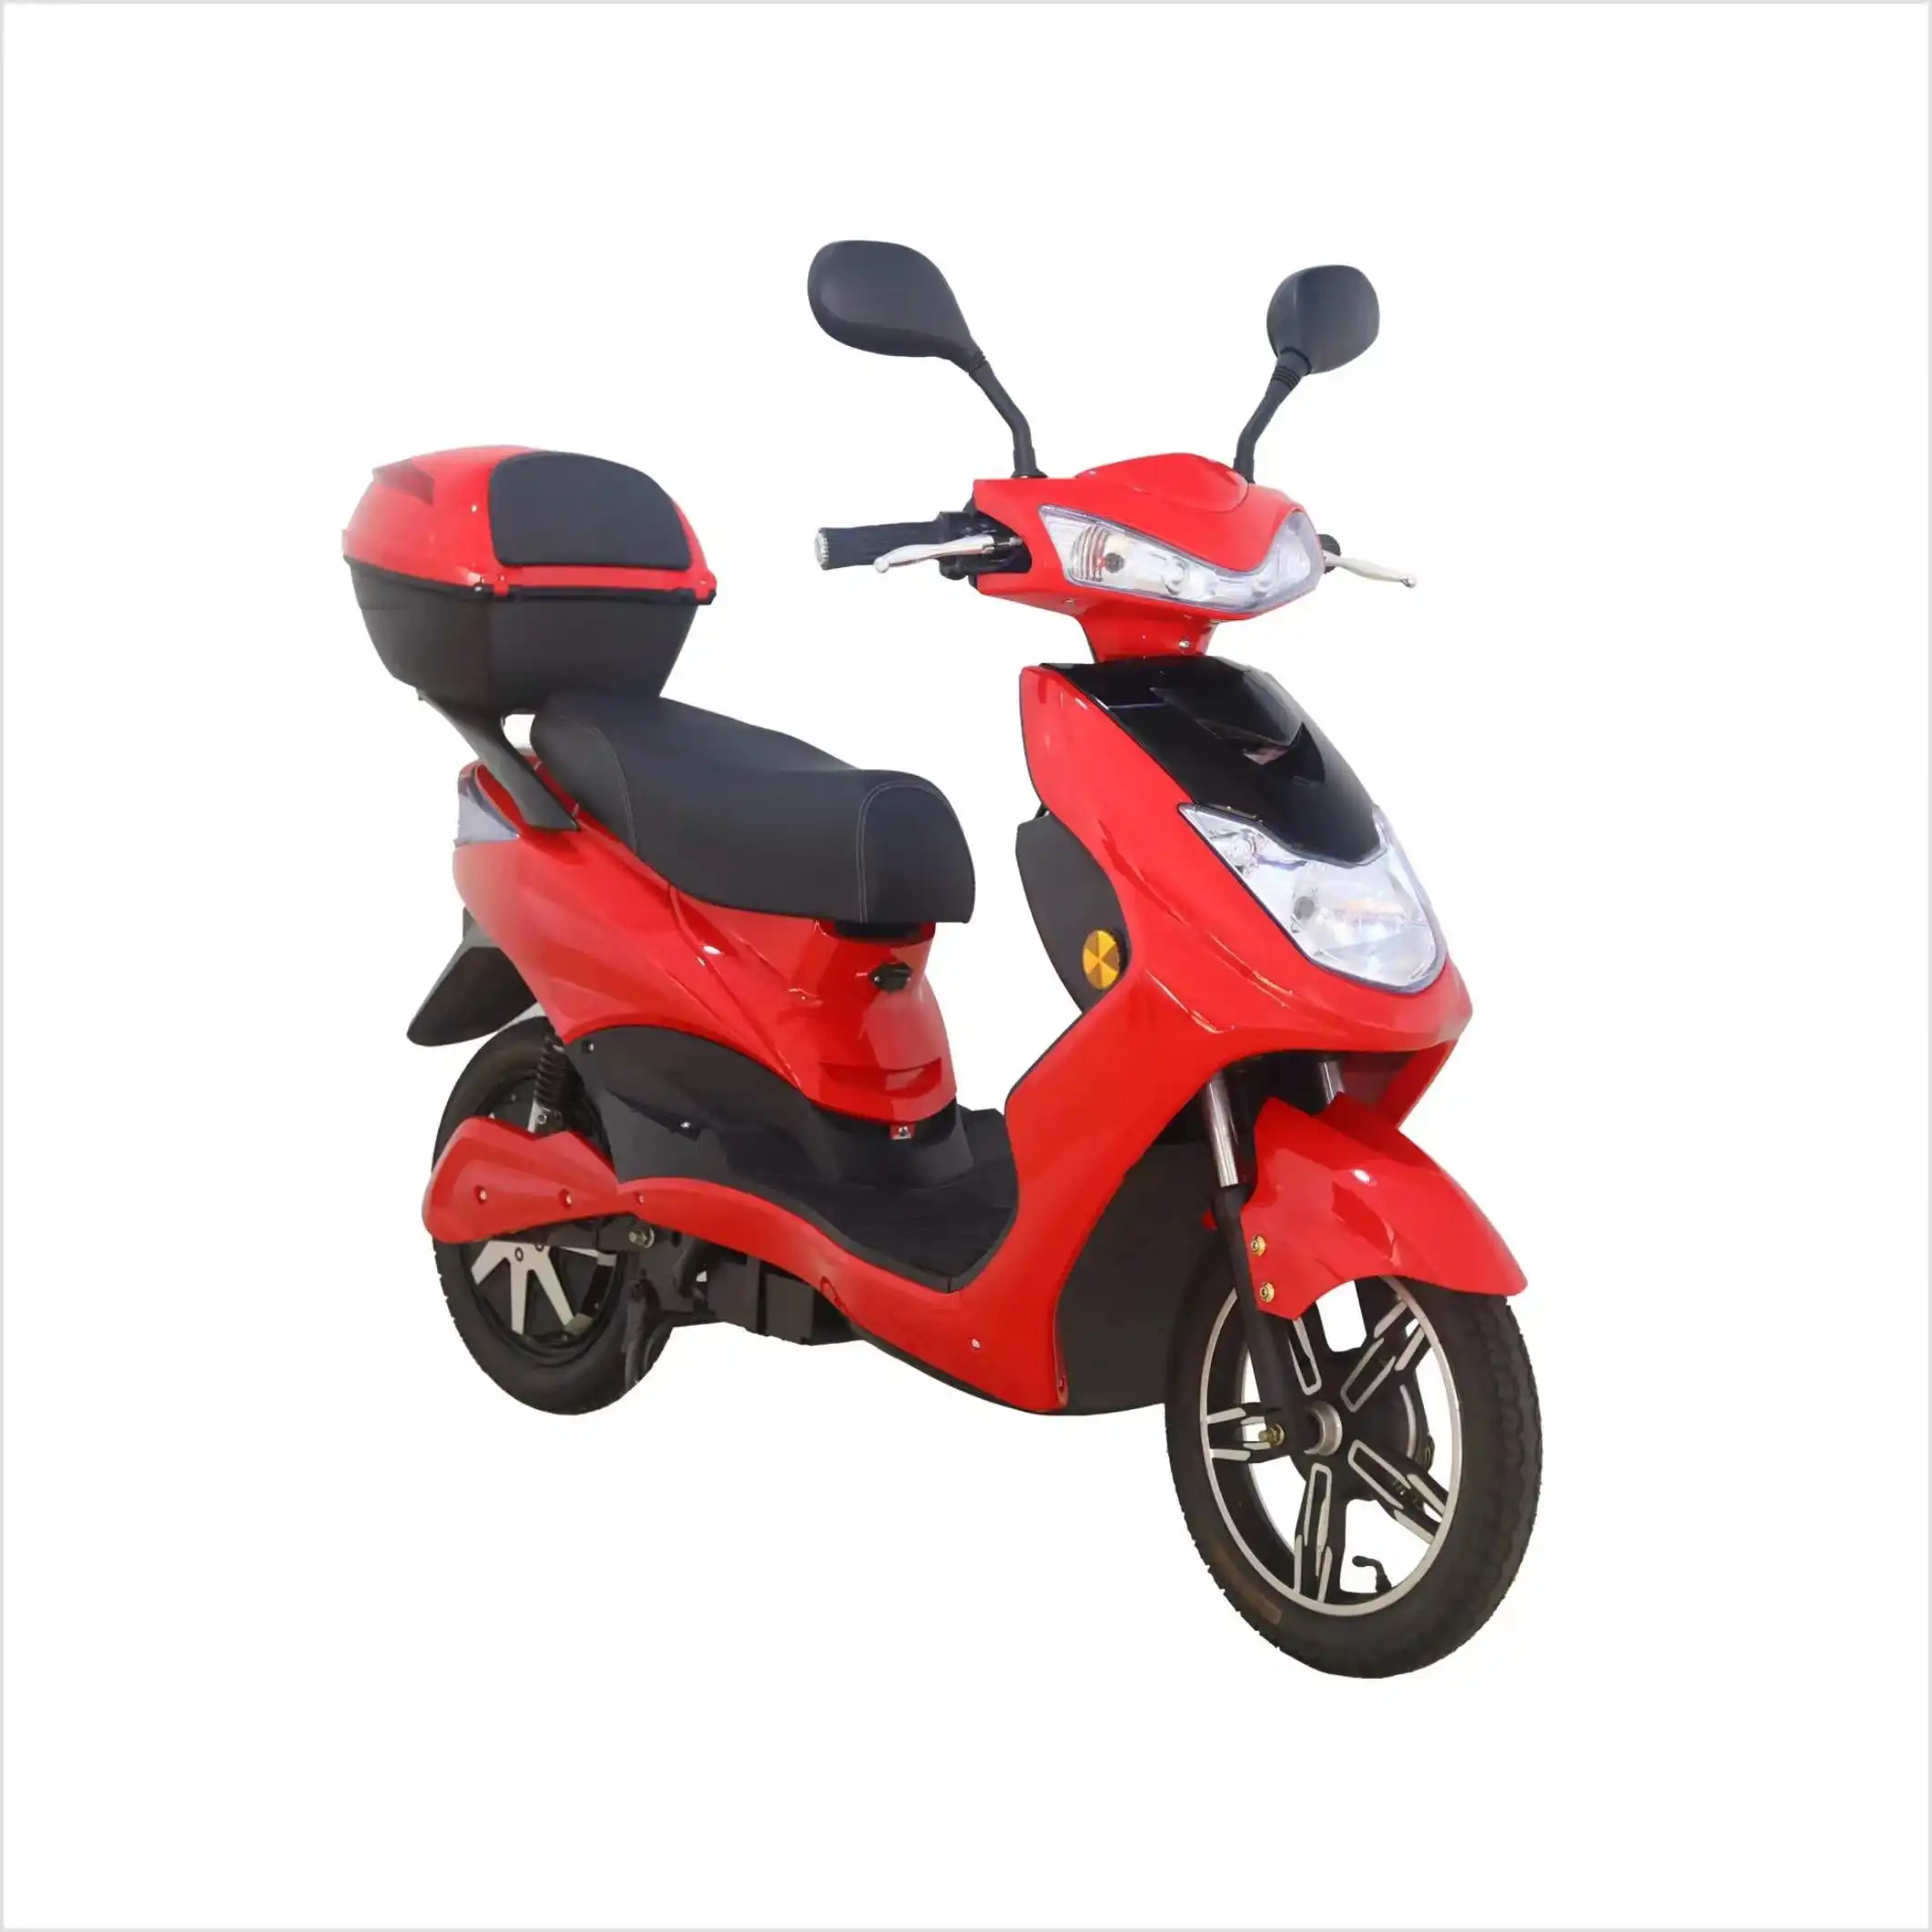 350W 500W 800W cheap electric motorcycle street bikes scooter electric motorcycle for teenagers